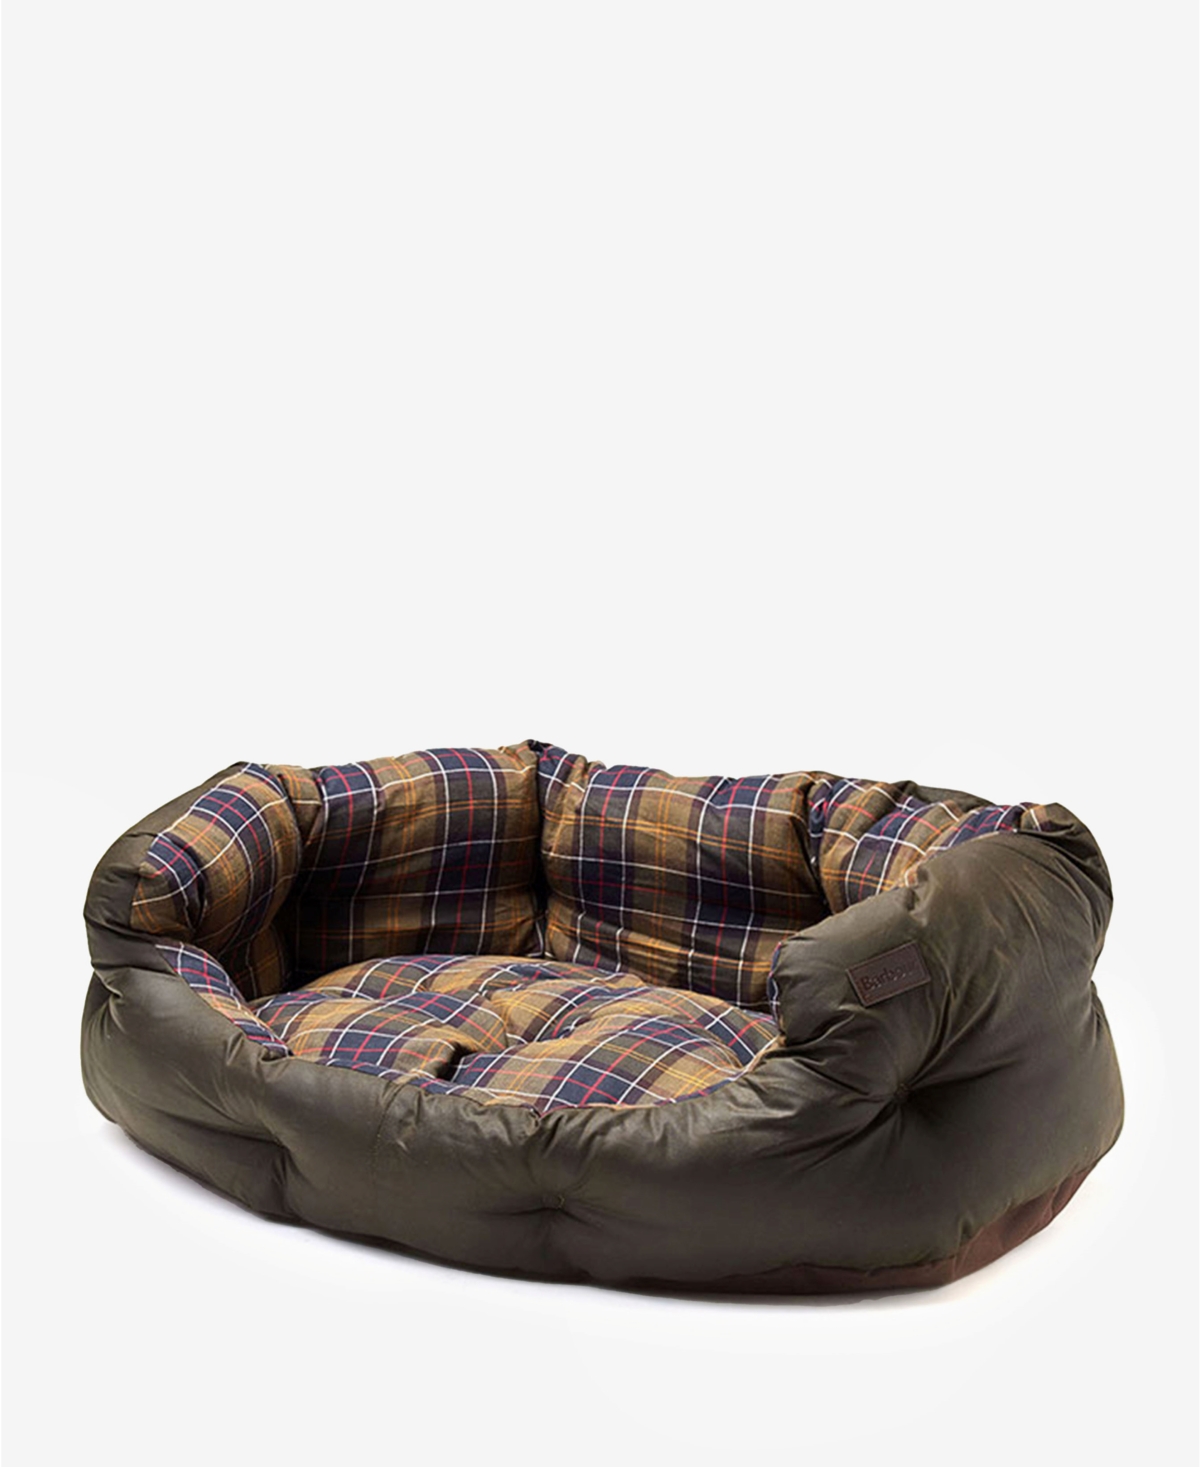 Plaid Lined Waxed Cotton Slumber Pet Bed, Large - Classic/ol